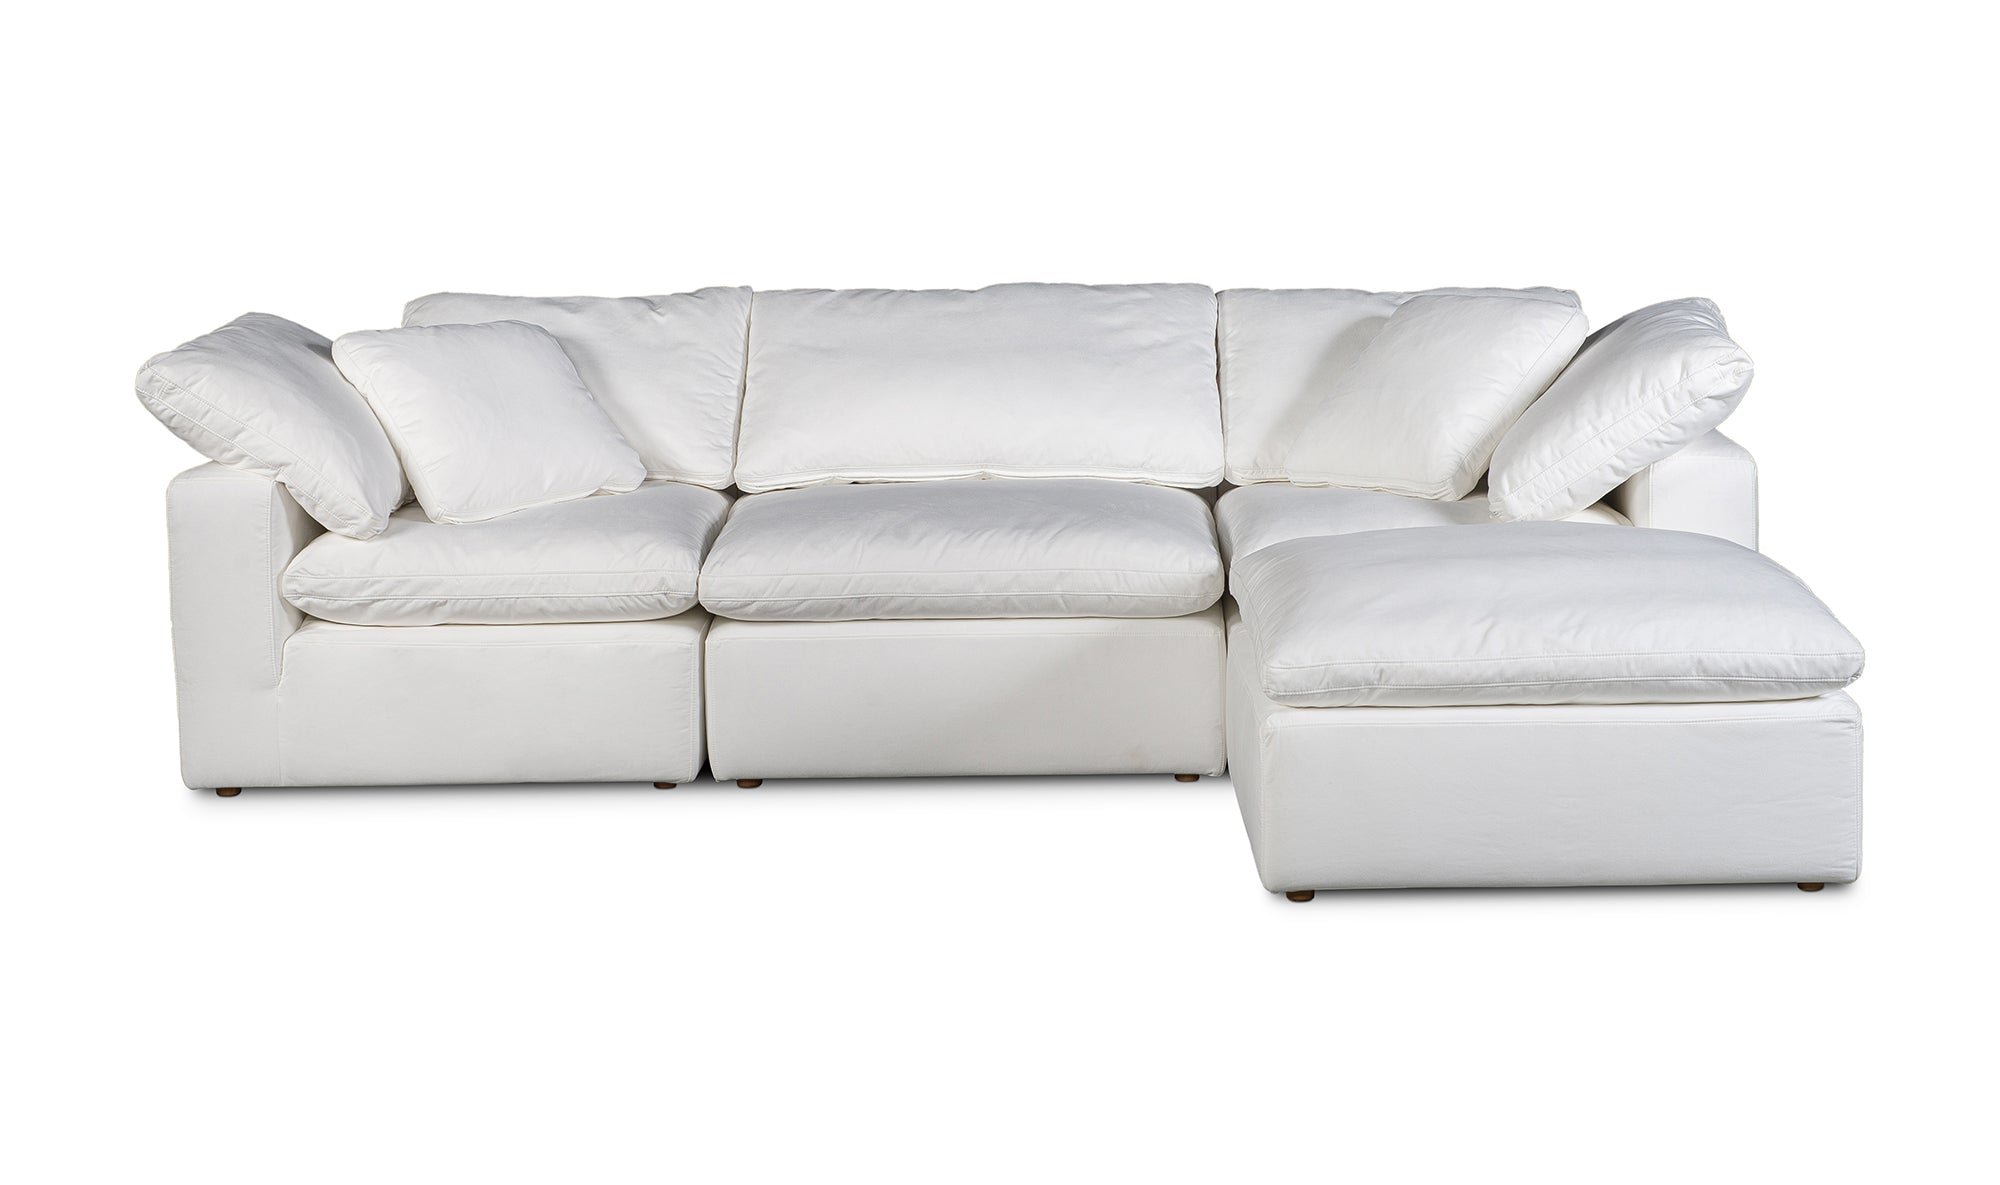 komfi cloud couch 4 piece white comfy 